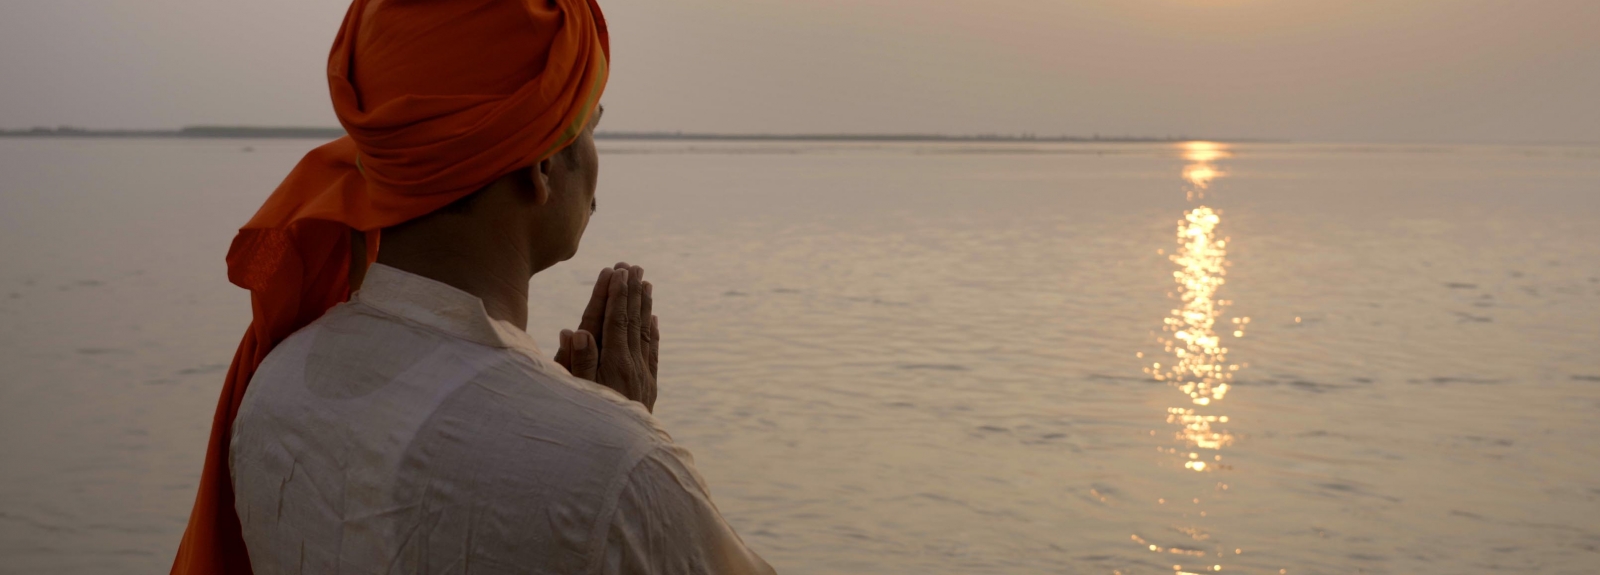 A man stands in front of a body of water with his hands folded in prayer.